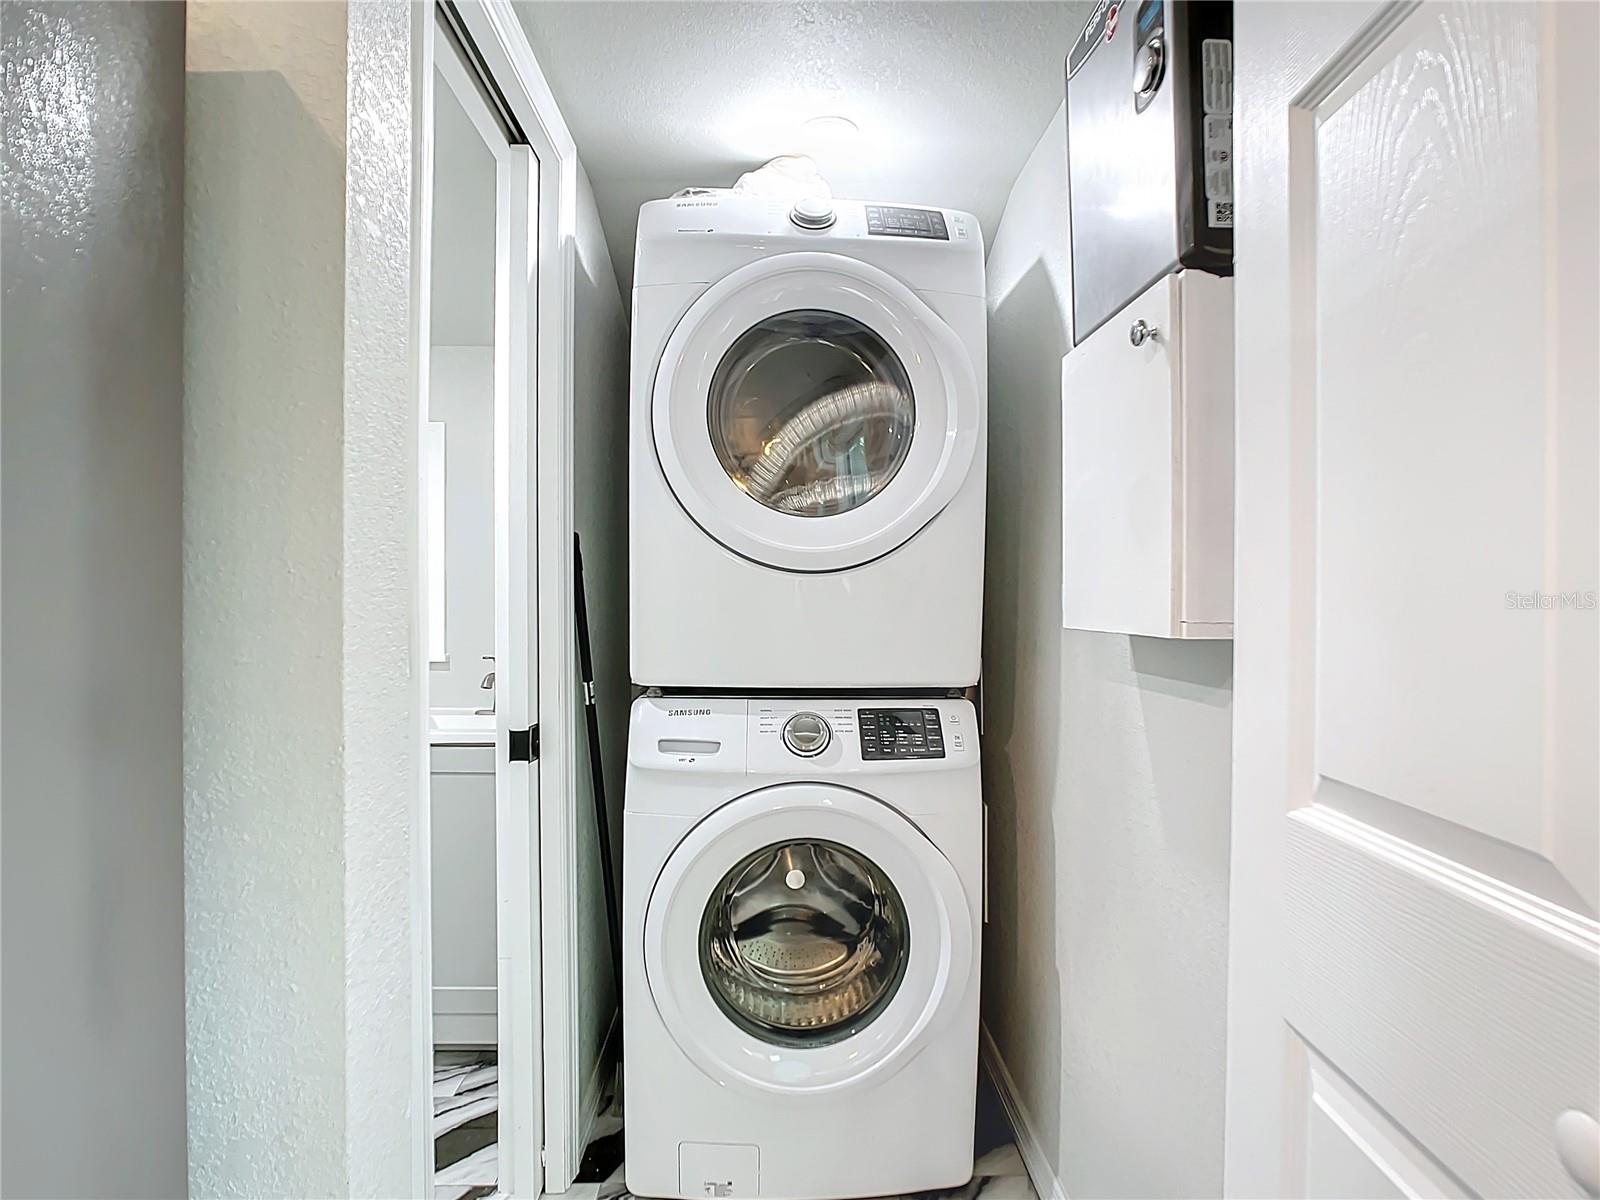 State of the art washer and dryer